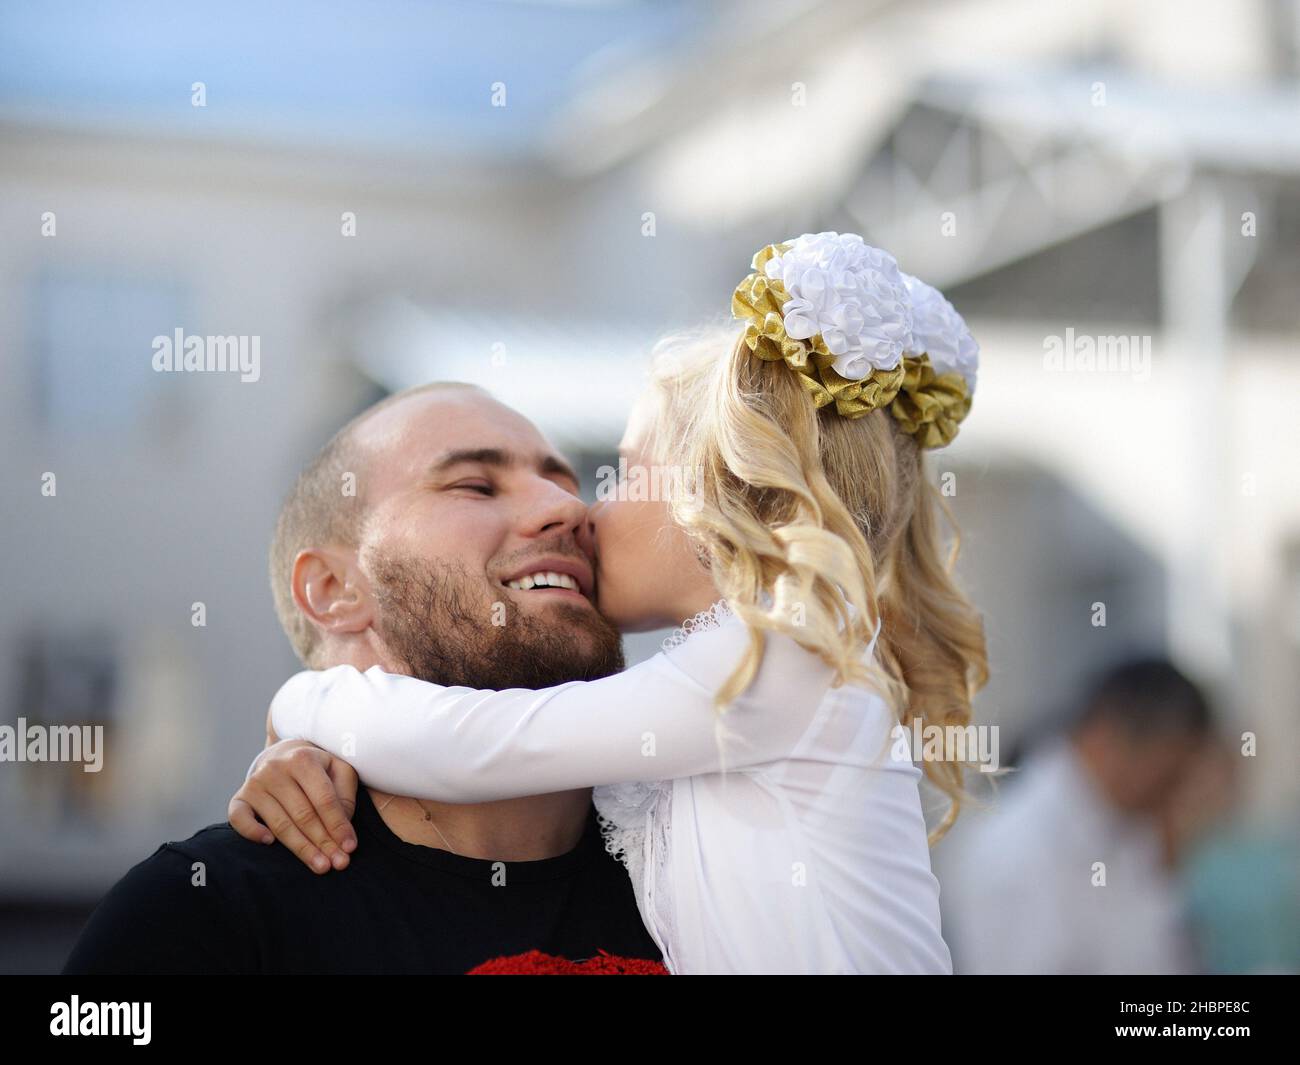 Daughter with dad, family happiness. Stock Photo